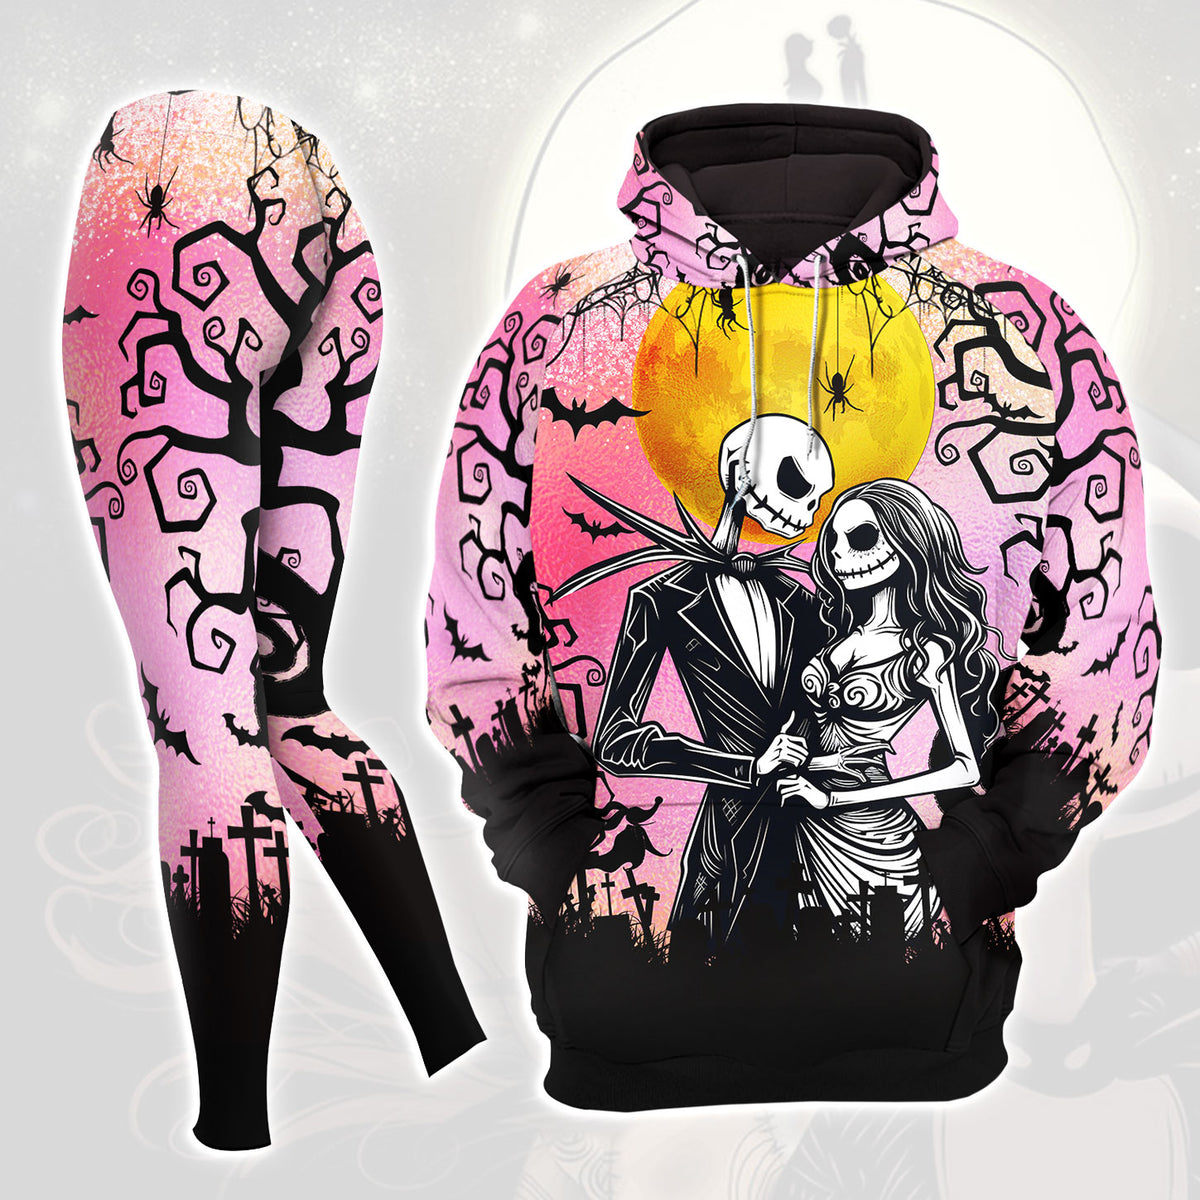 Pink Couple Nightmare Theme Combo Hoodie and Leggings - Dark and edgy matching set with skull designs for a unique and stylish look